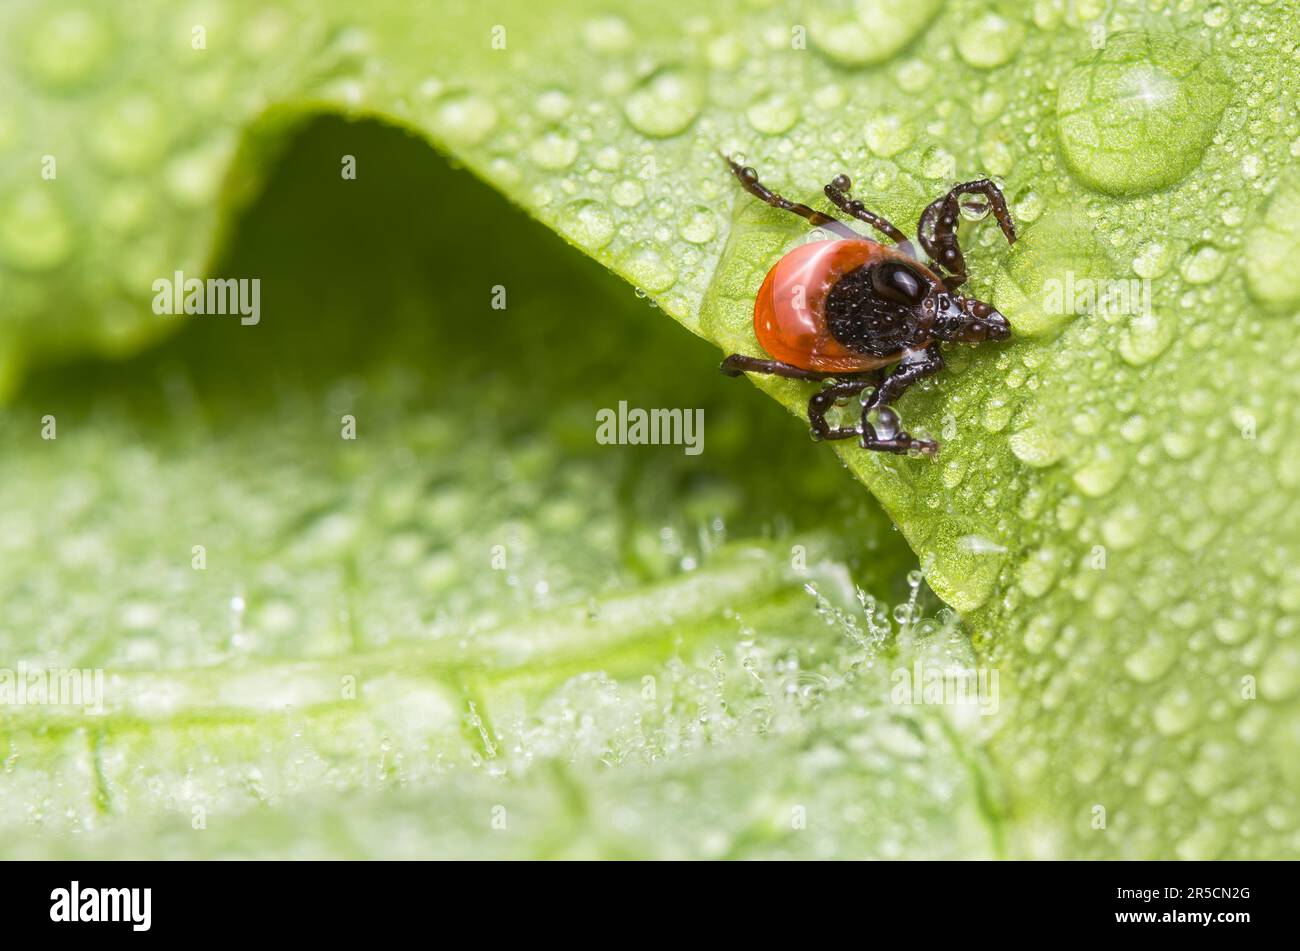 Close-up of castor bean tick parasite on green leaf with water drops. Transmission of tick-borne diseases as encephalitis, Lyme disease or babesiosis. Stock Photo